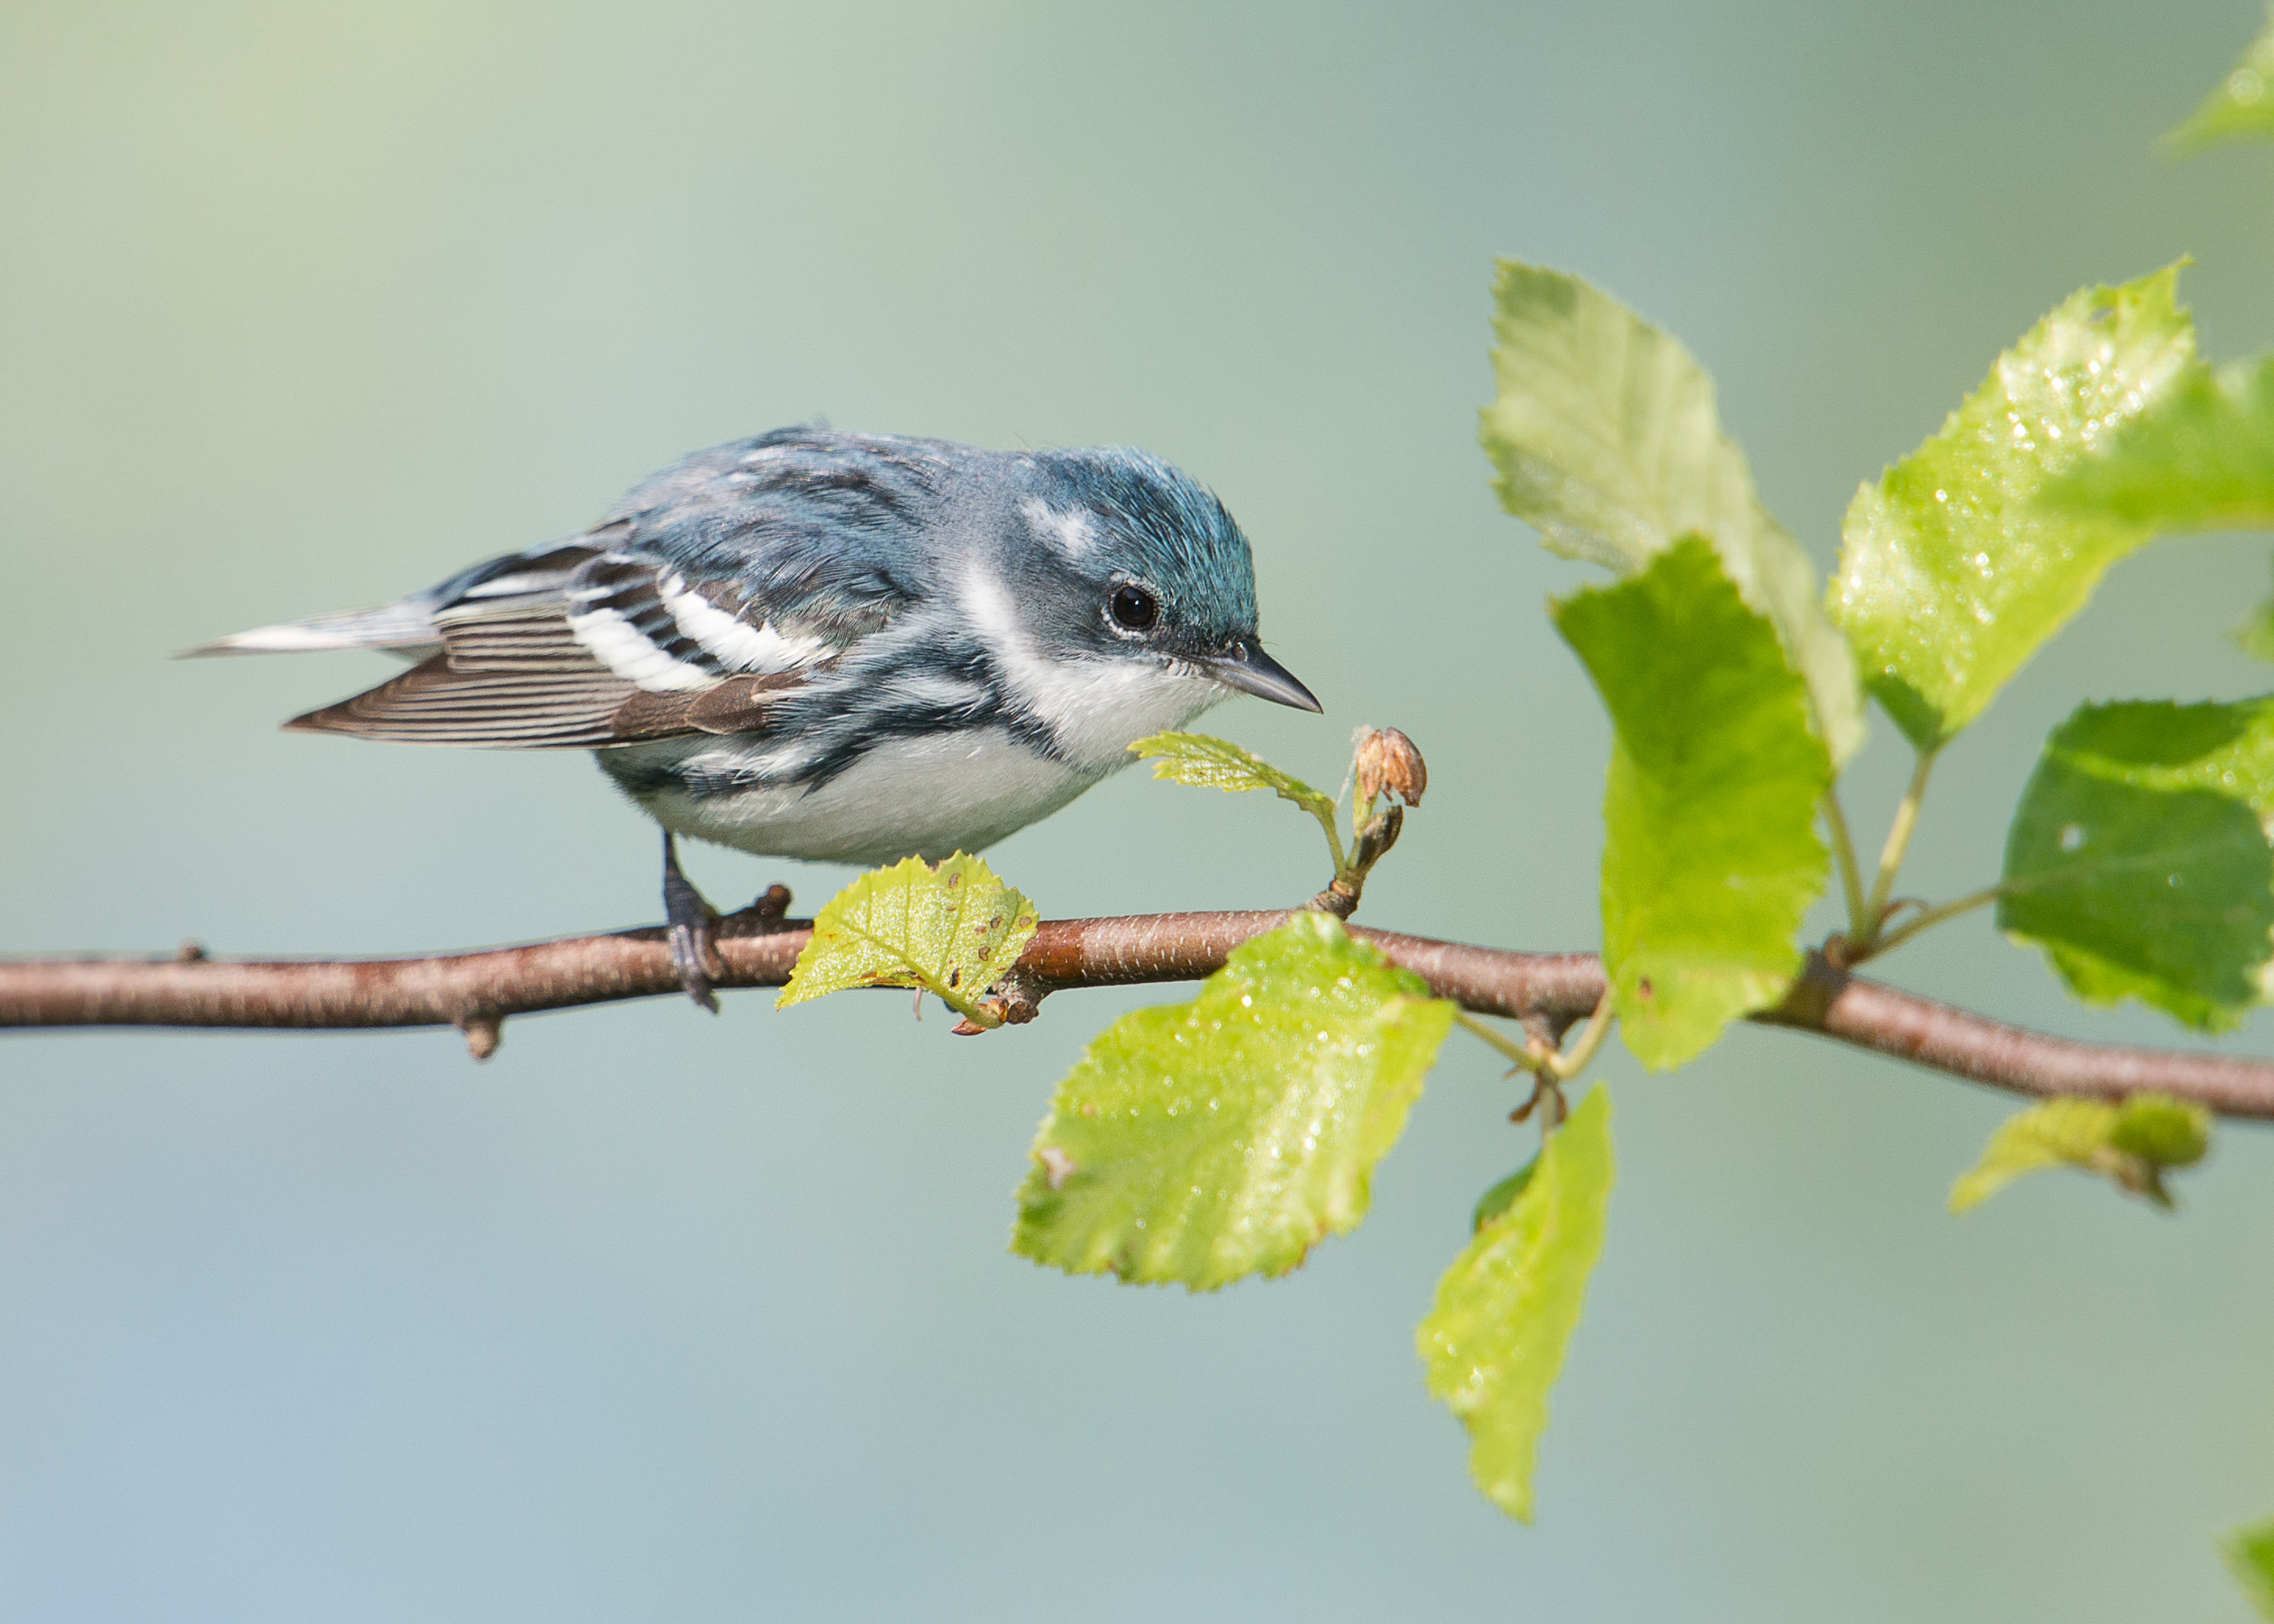 Photo of a Cerulean warbler, with bluish feathers on head and stripes on body.